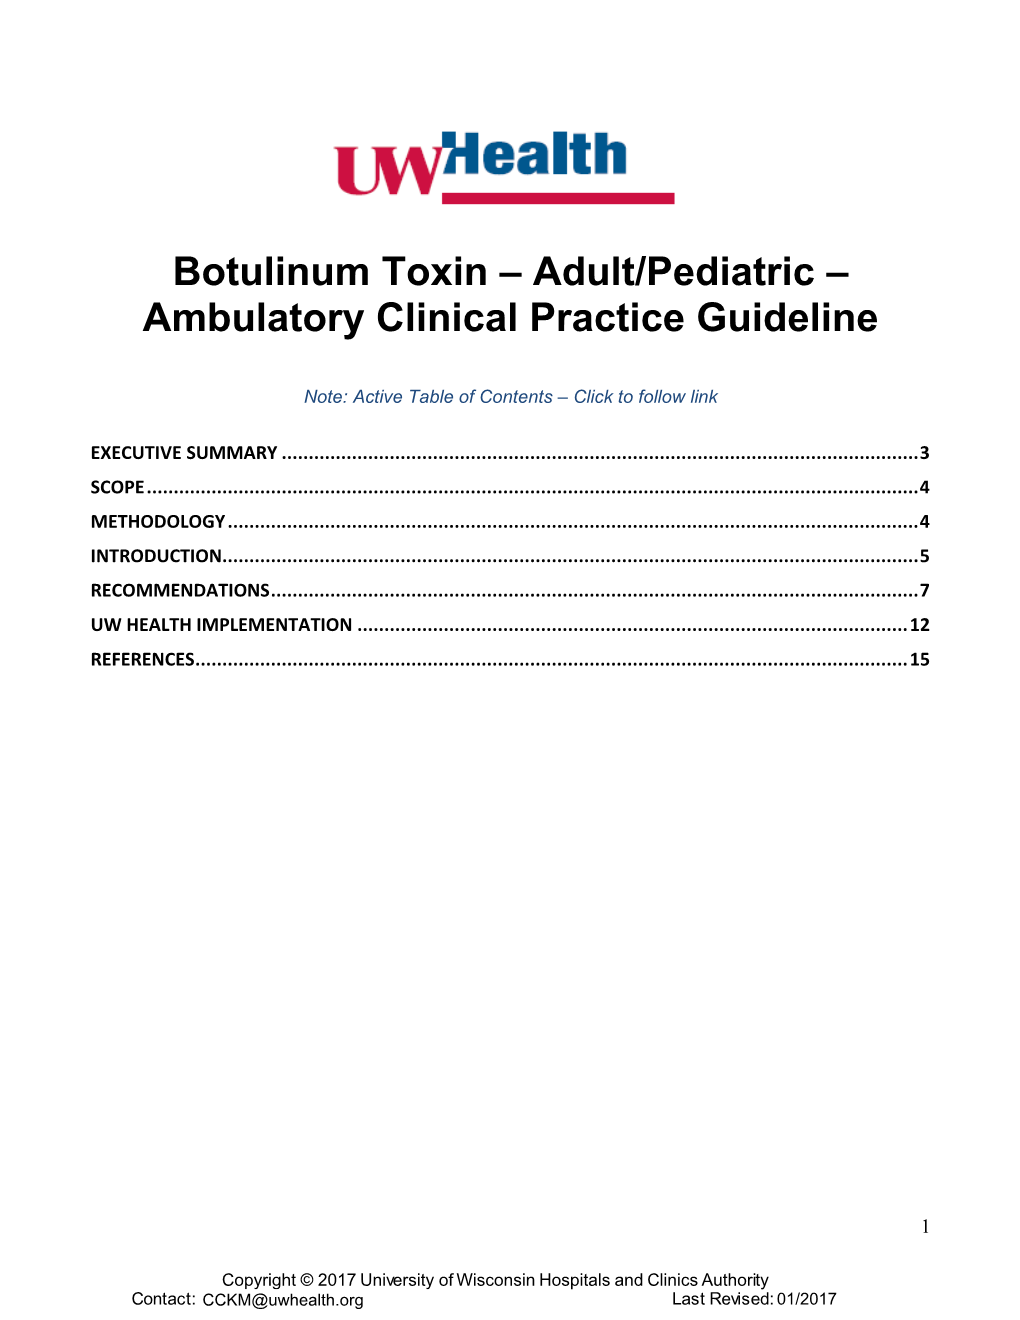 UW Health Guidelines for the Use of Botulinum Toxin